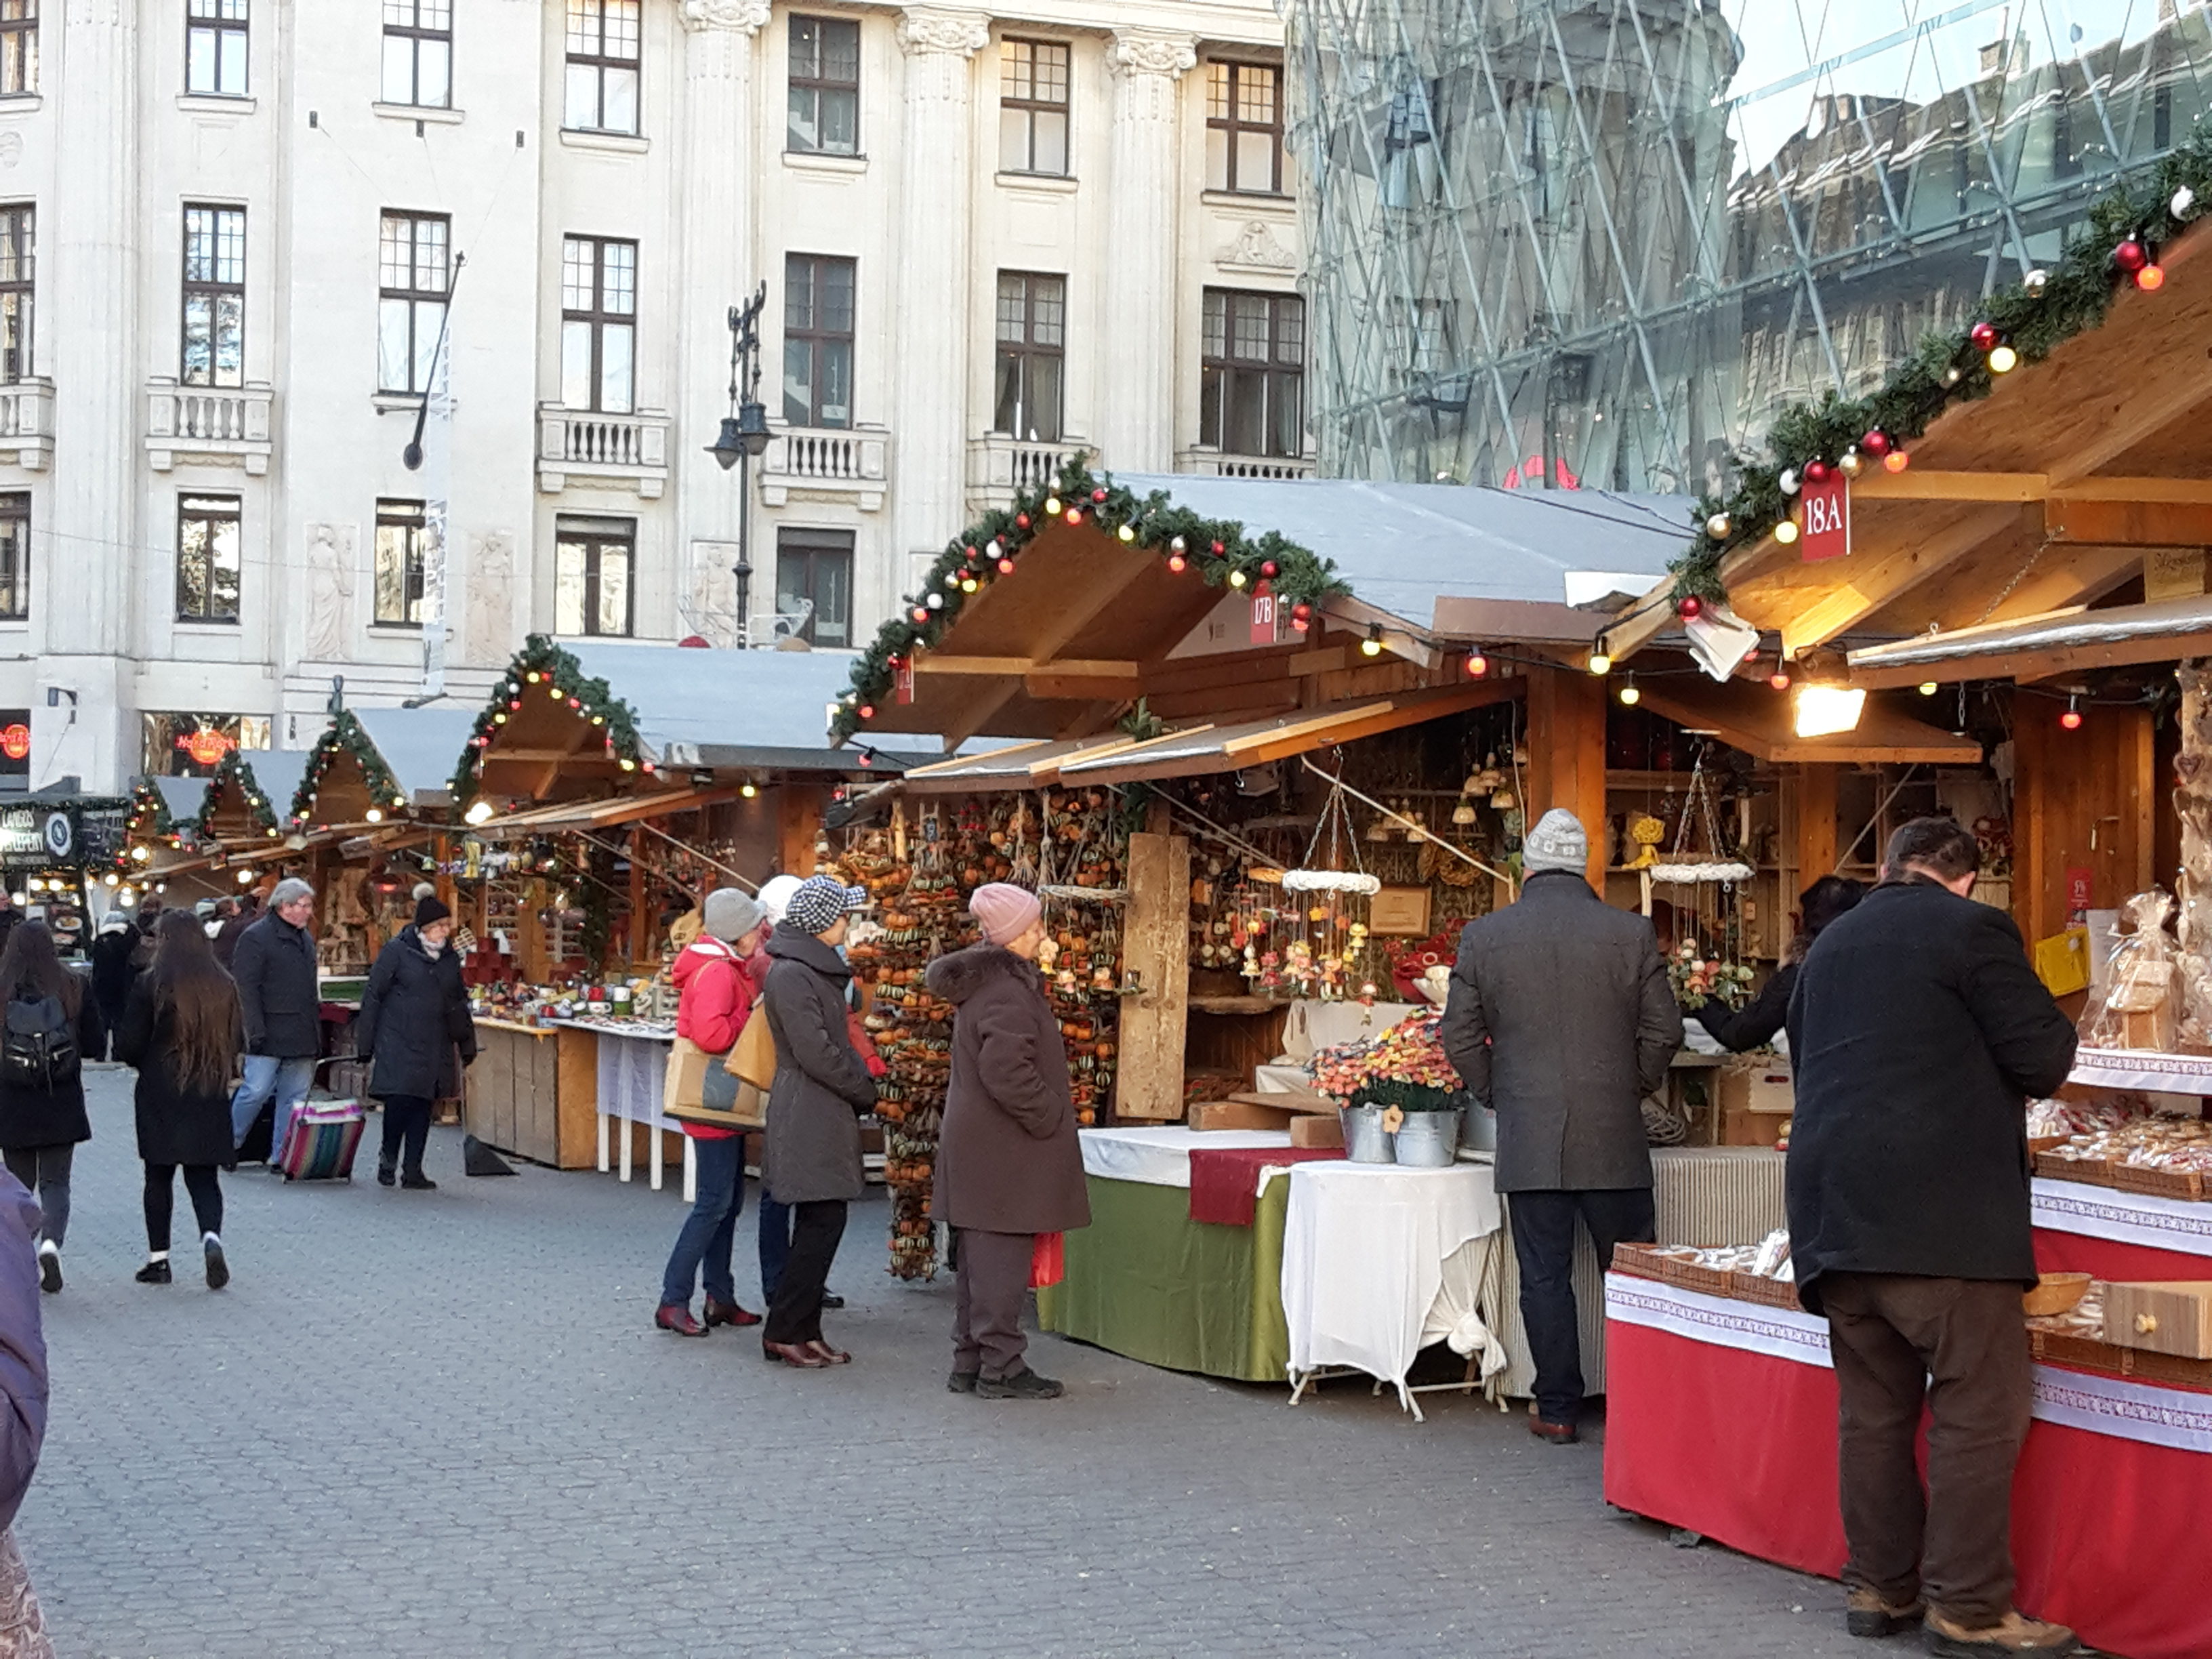 The Christmas Market in Budapest (in pictures)